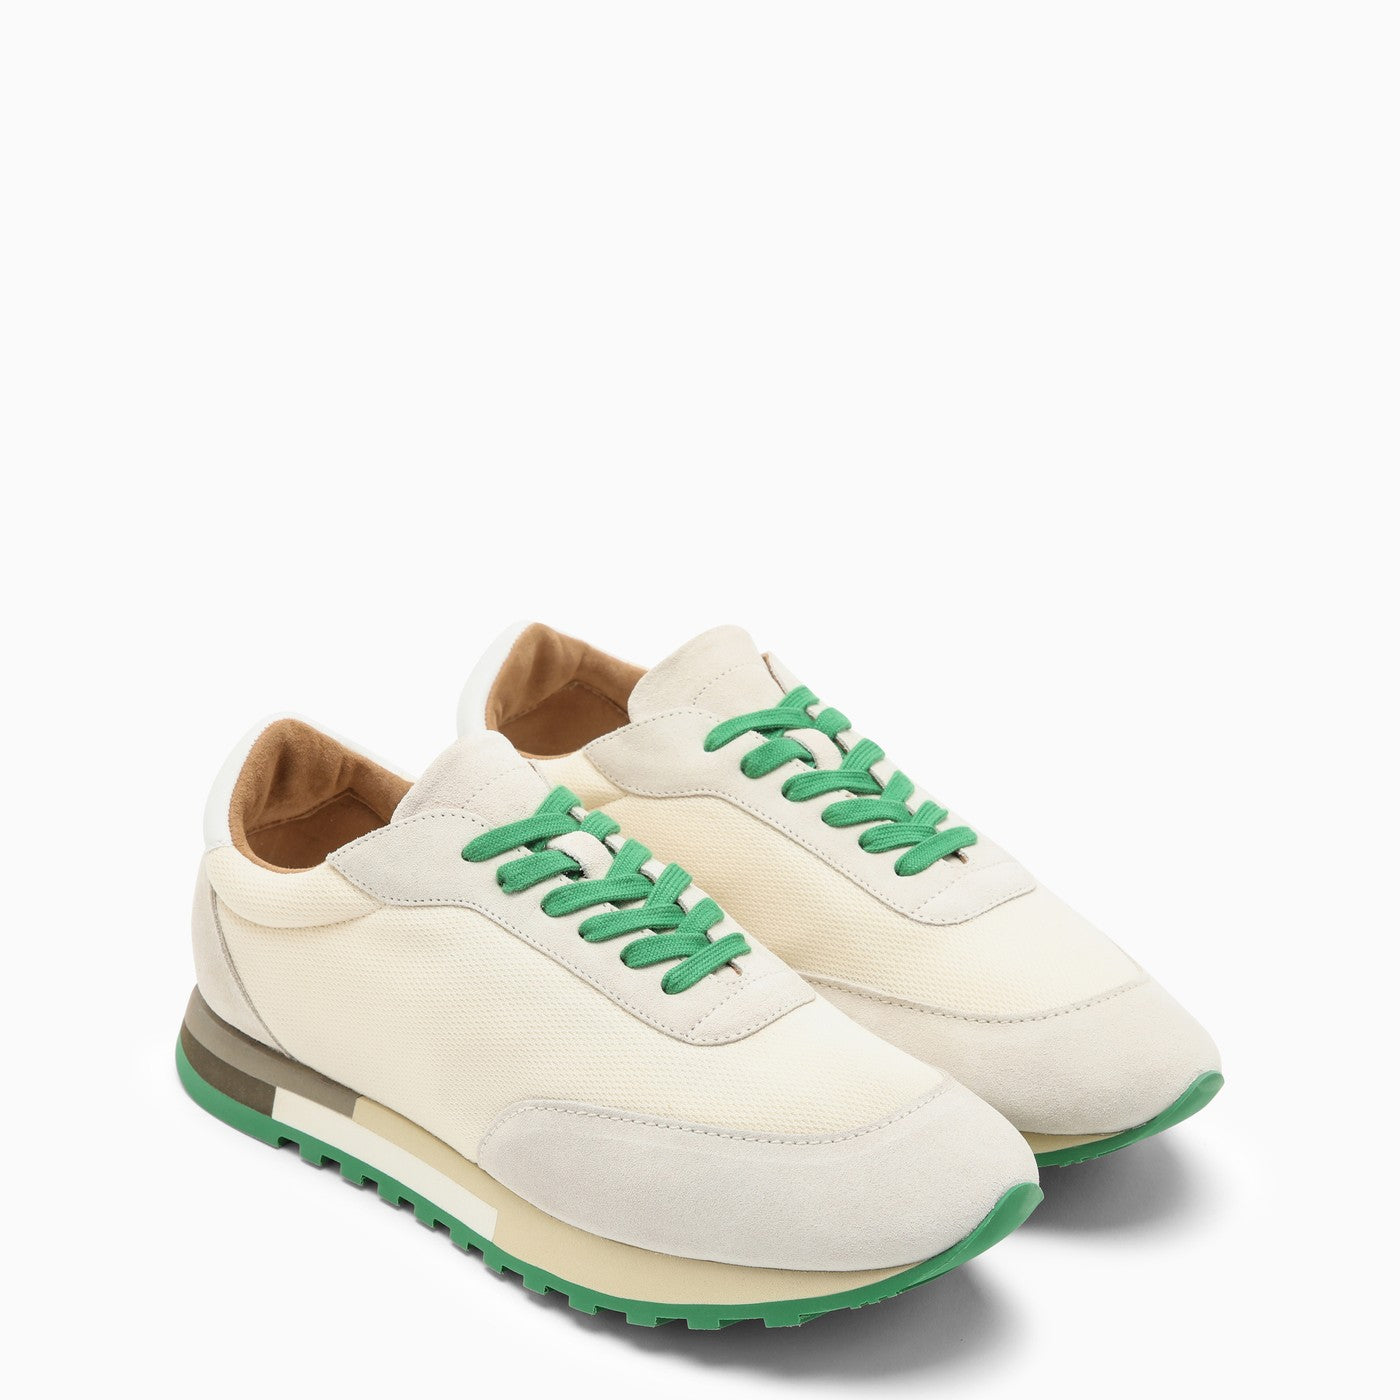 The Row Low Owen Runner Ivory/Green Trainer